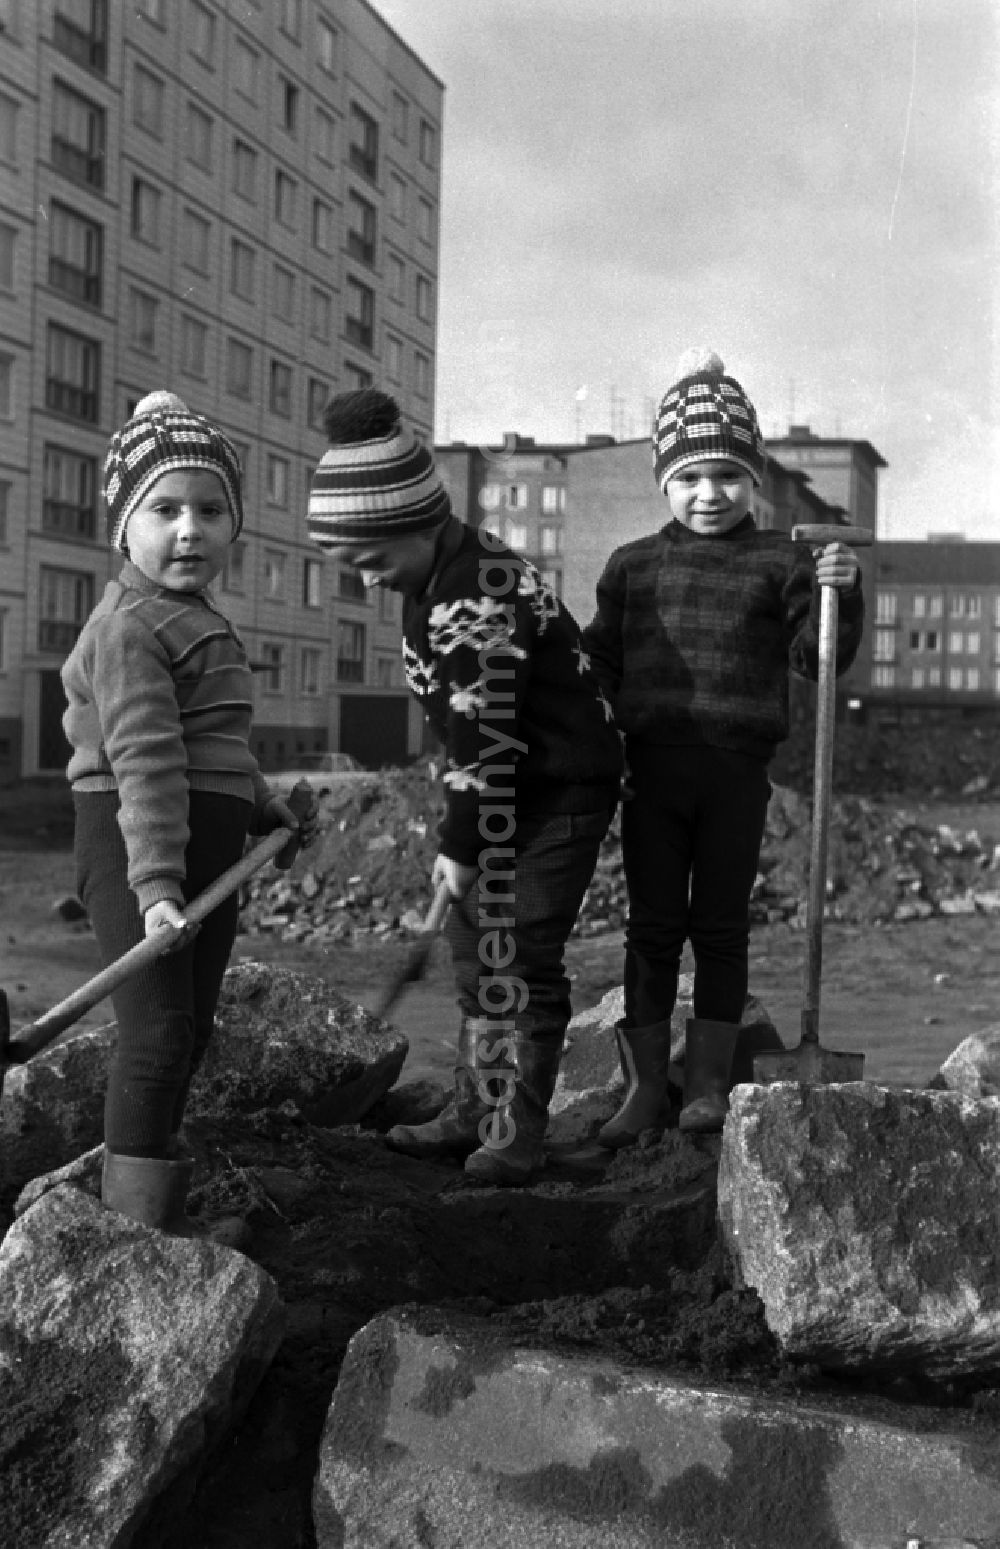 GDR photo archive: Magdeburg - Young children with rubber boots and kids godparents play on a backyard in Magdeburg